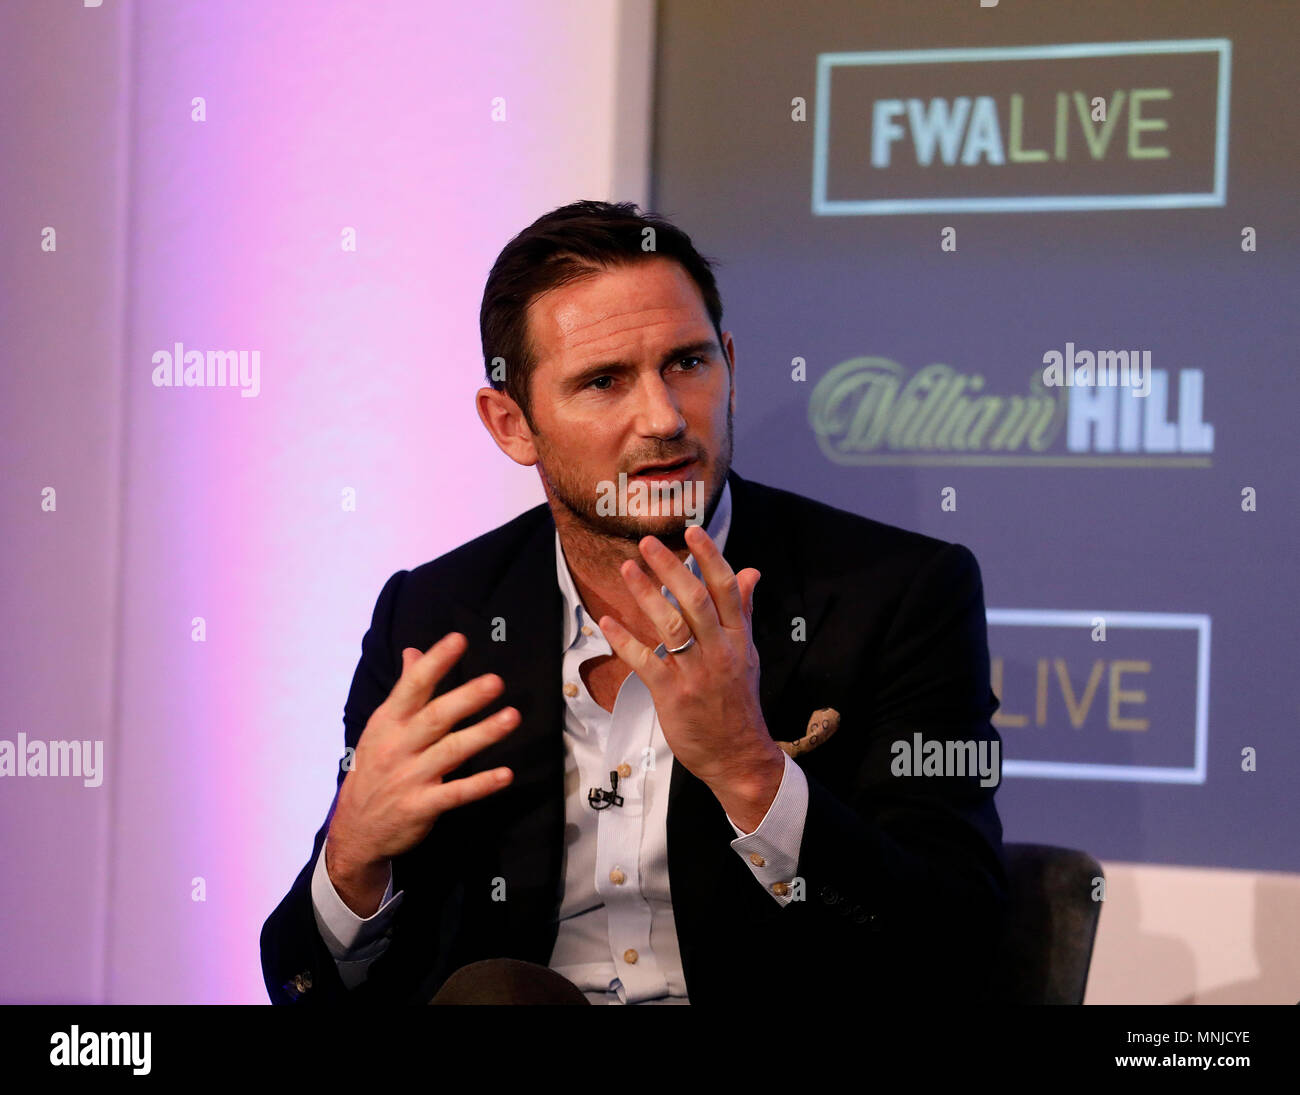 Frank Lampard former England international and Chelsea player during the William Hill FWA Live event at the Landmark Hotel, London. PRESS ASSOCIATION Photo. Picture date: Thursday May 17, 2018. Photo credit should read: Steven Paston/PA Wire Stock Photo